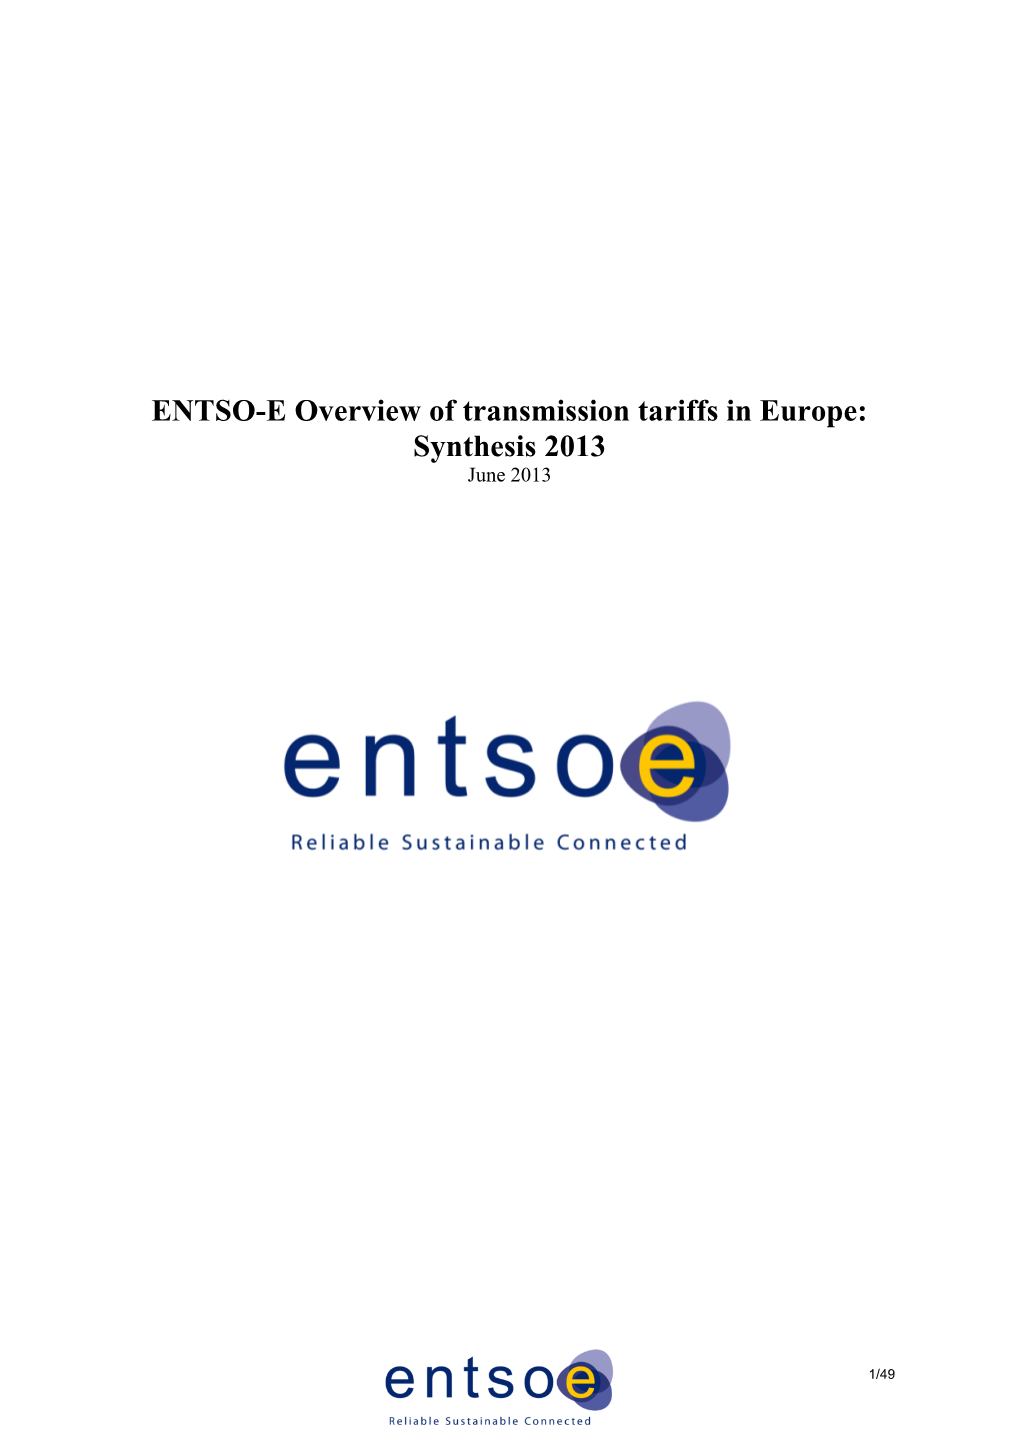 ENTSO-E Overview of Transmission Tariffs in Europe: Synthesis 2013 June 2013